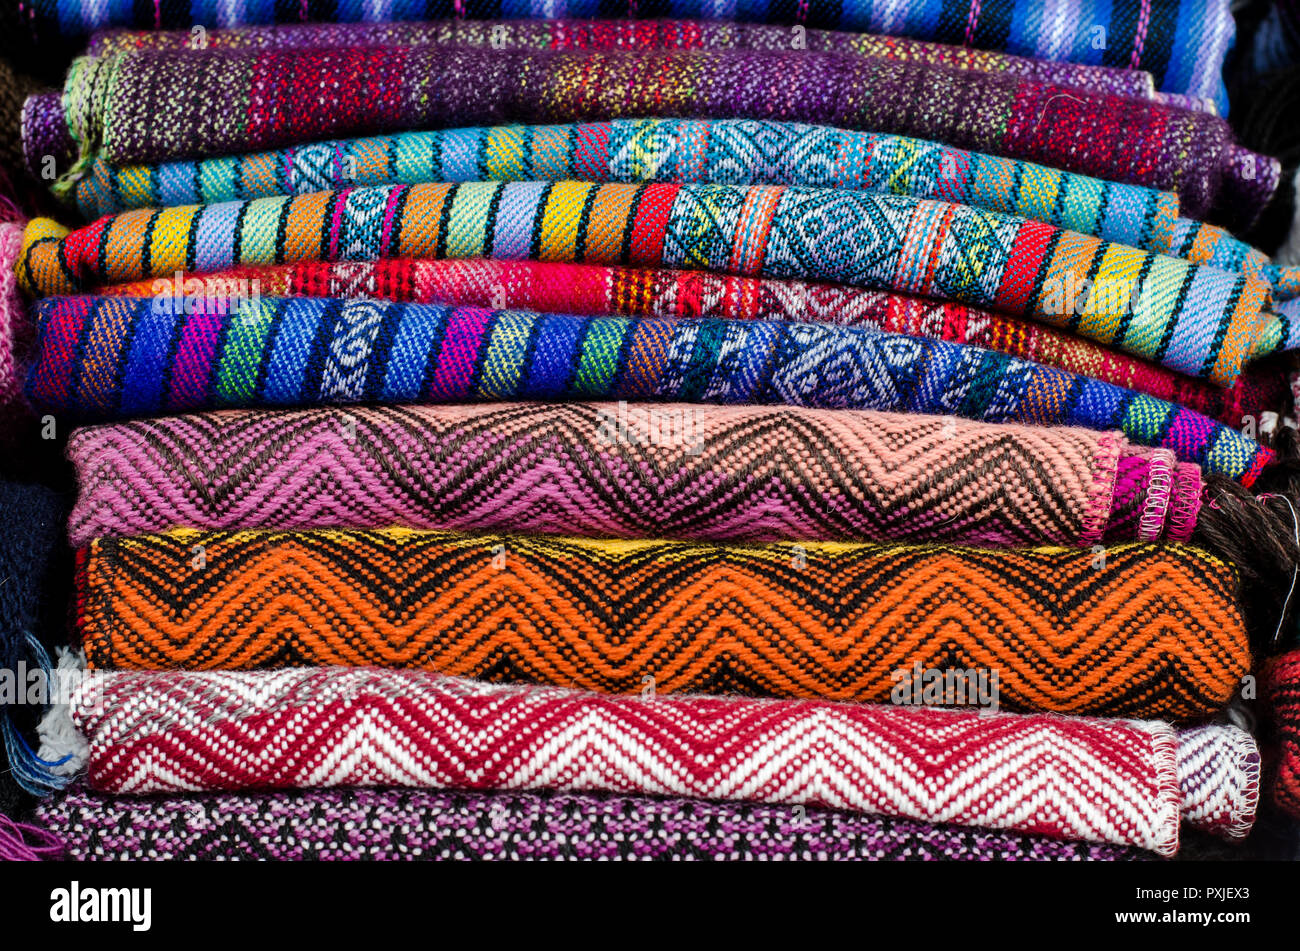 Colorful handmade textile from Chinchero Stock Photo